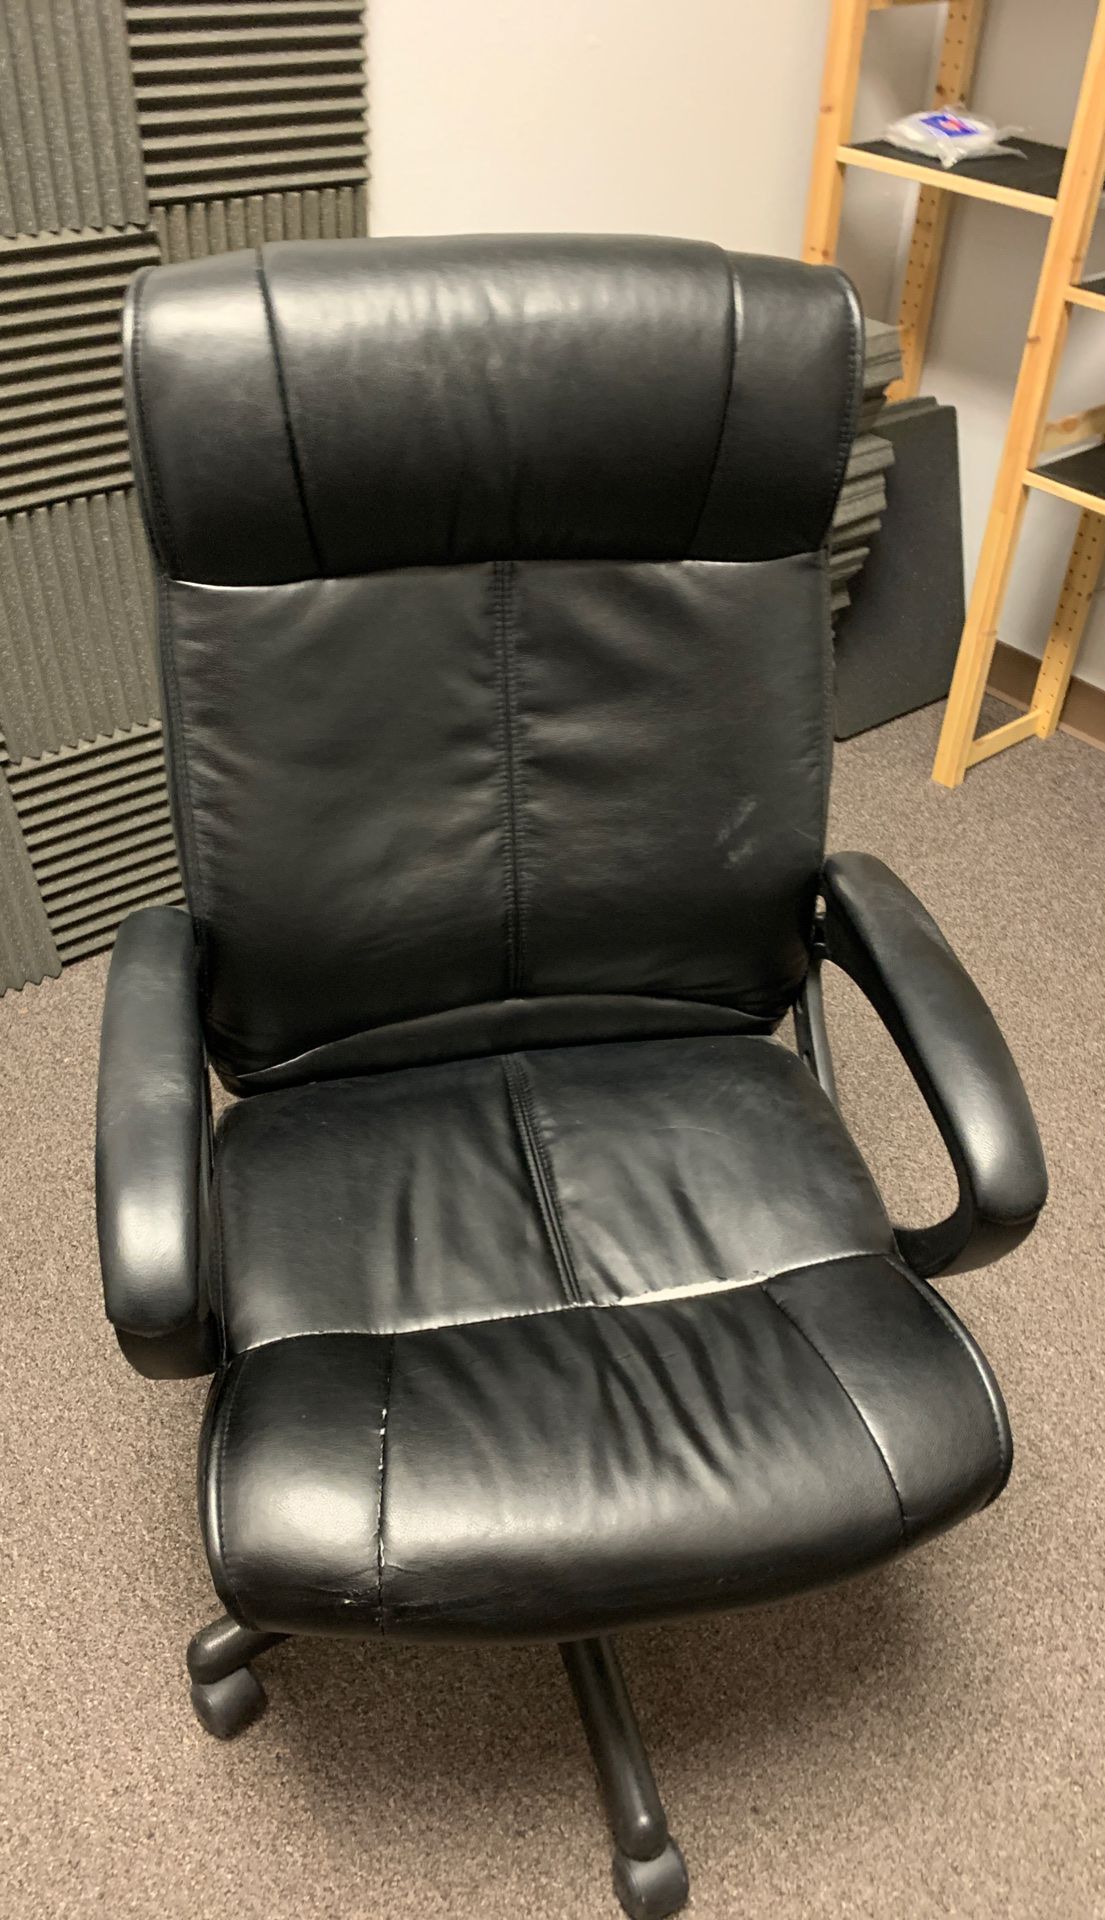 Tall Desk Chair. Some wear. Good condition